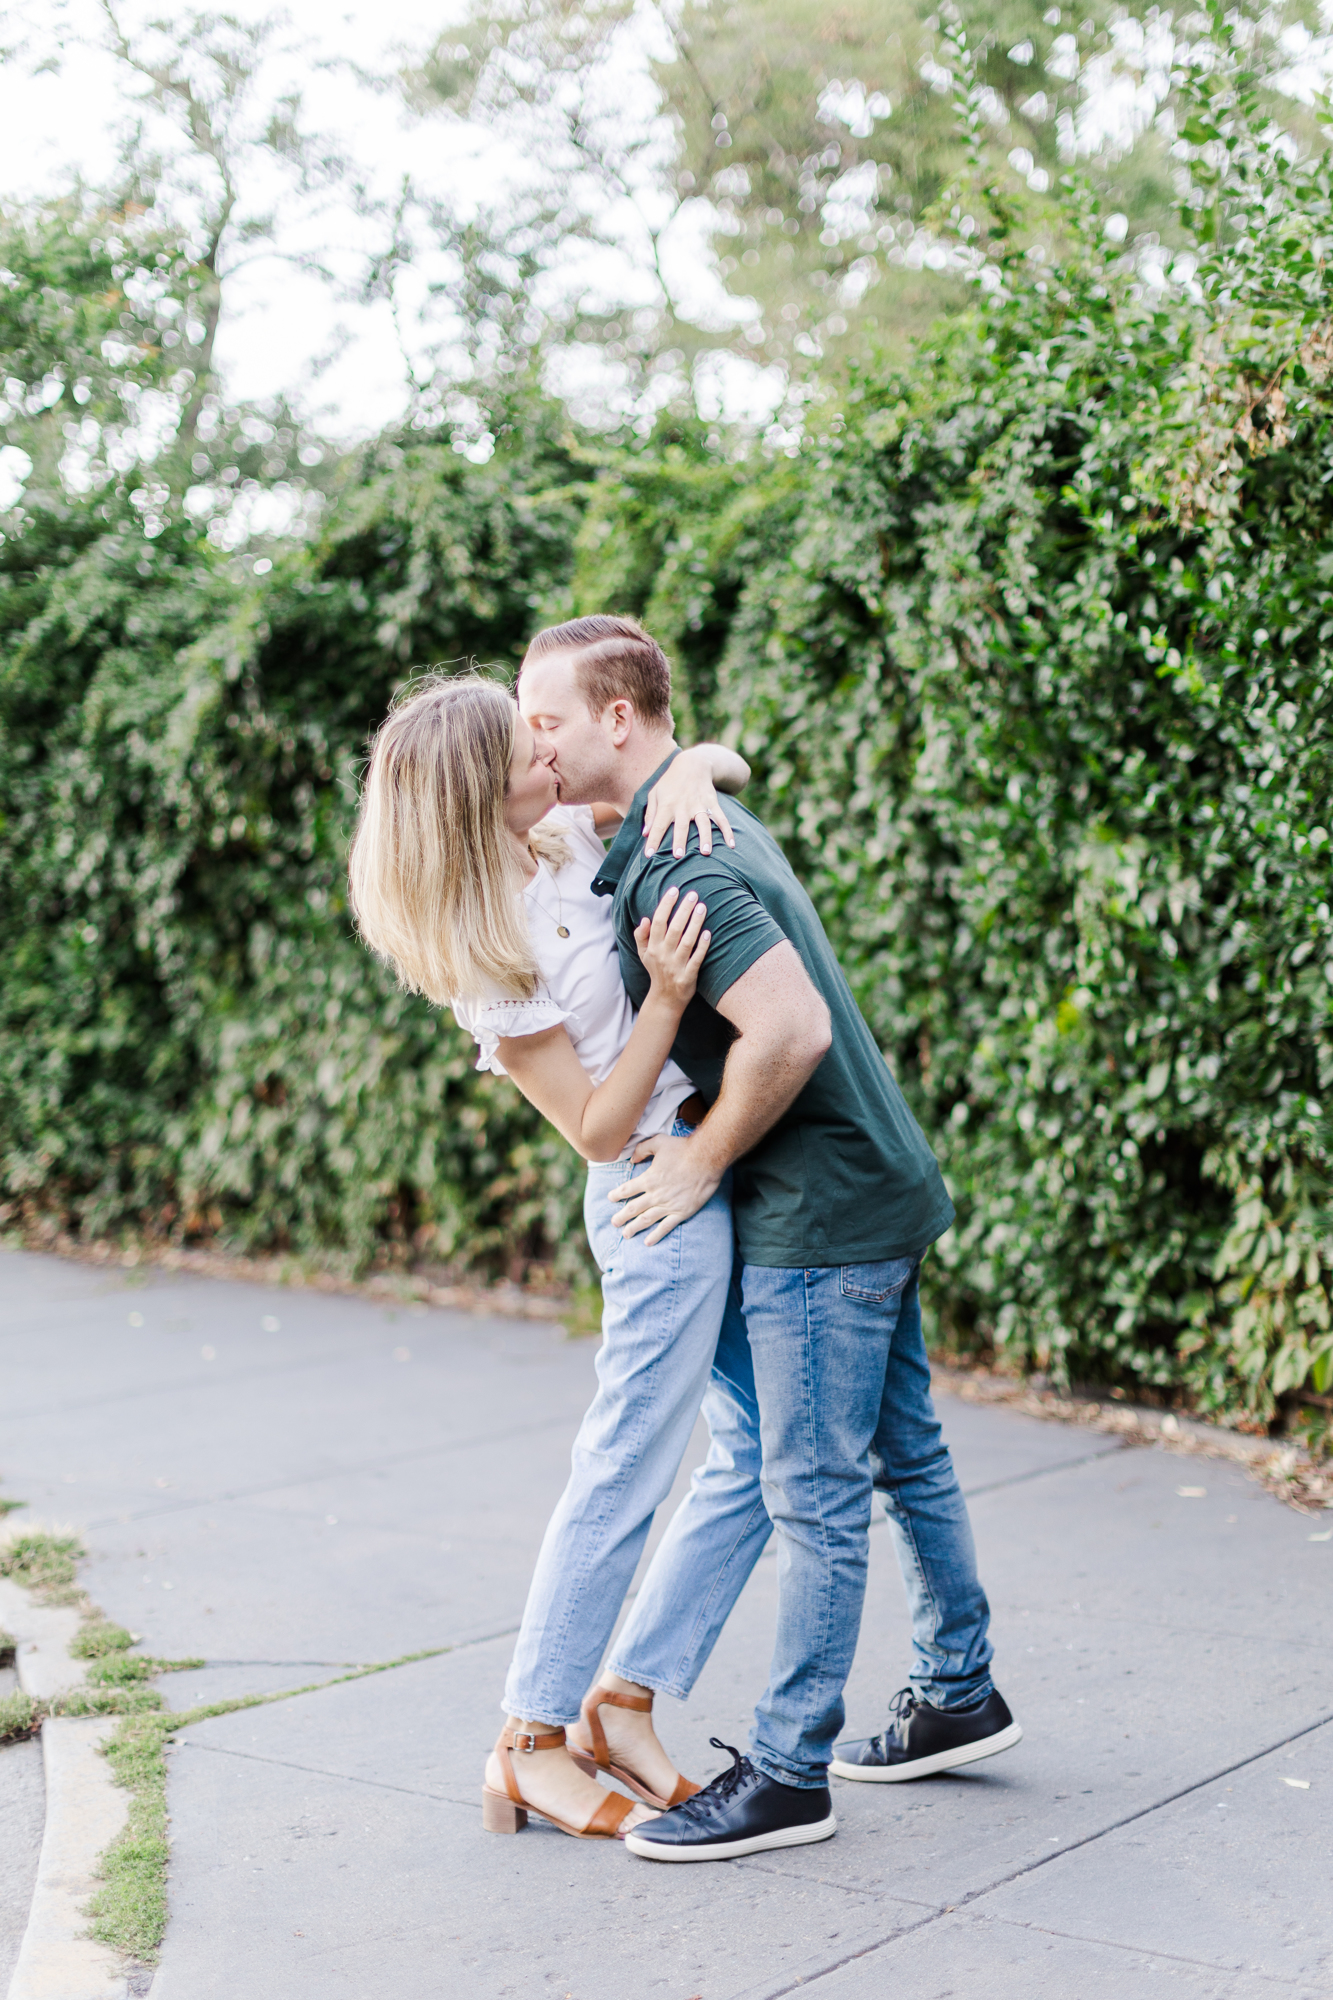 Vibrant Engagement Photos In Brooklyn Heights